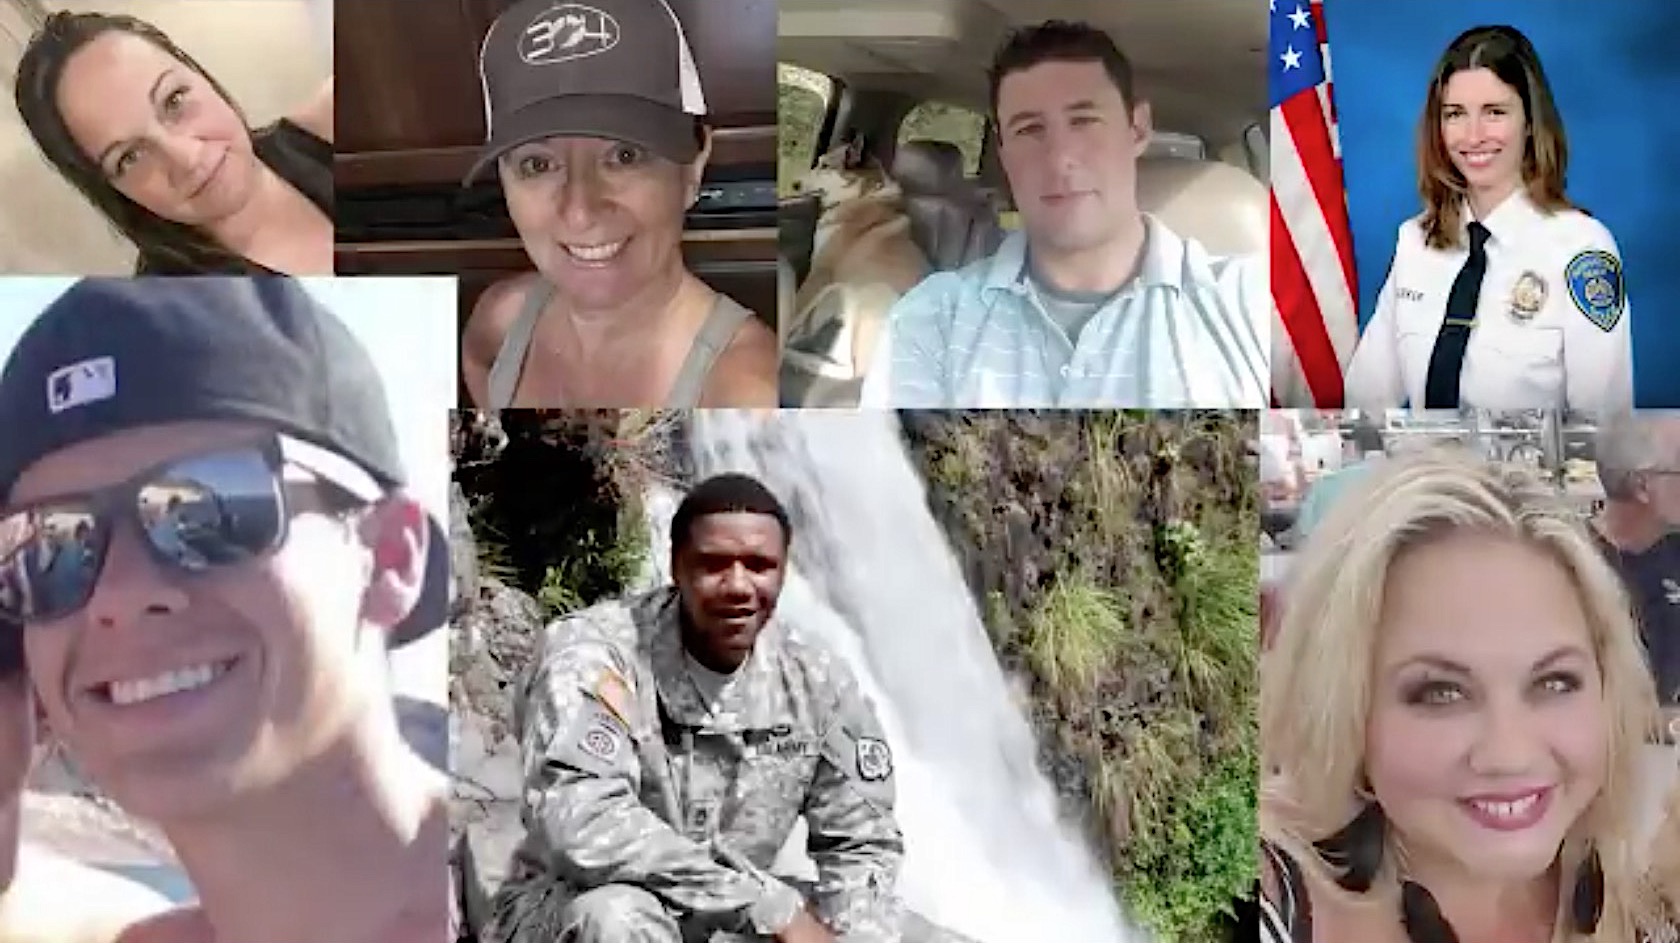 Some of the Las Vegas victims